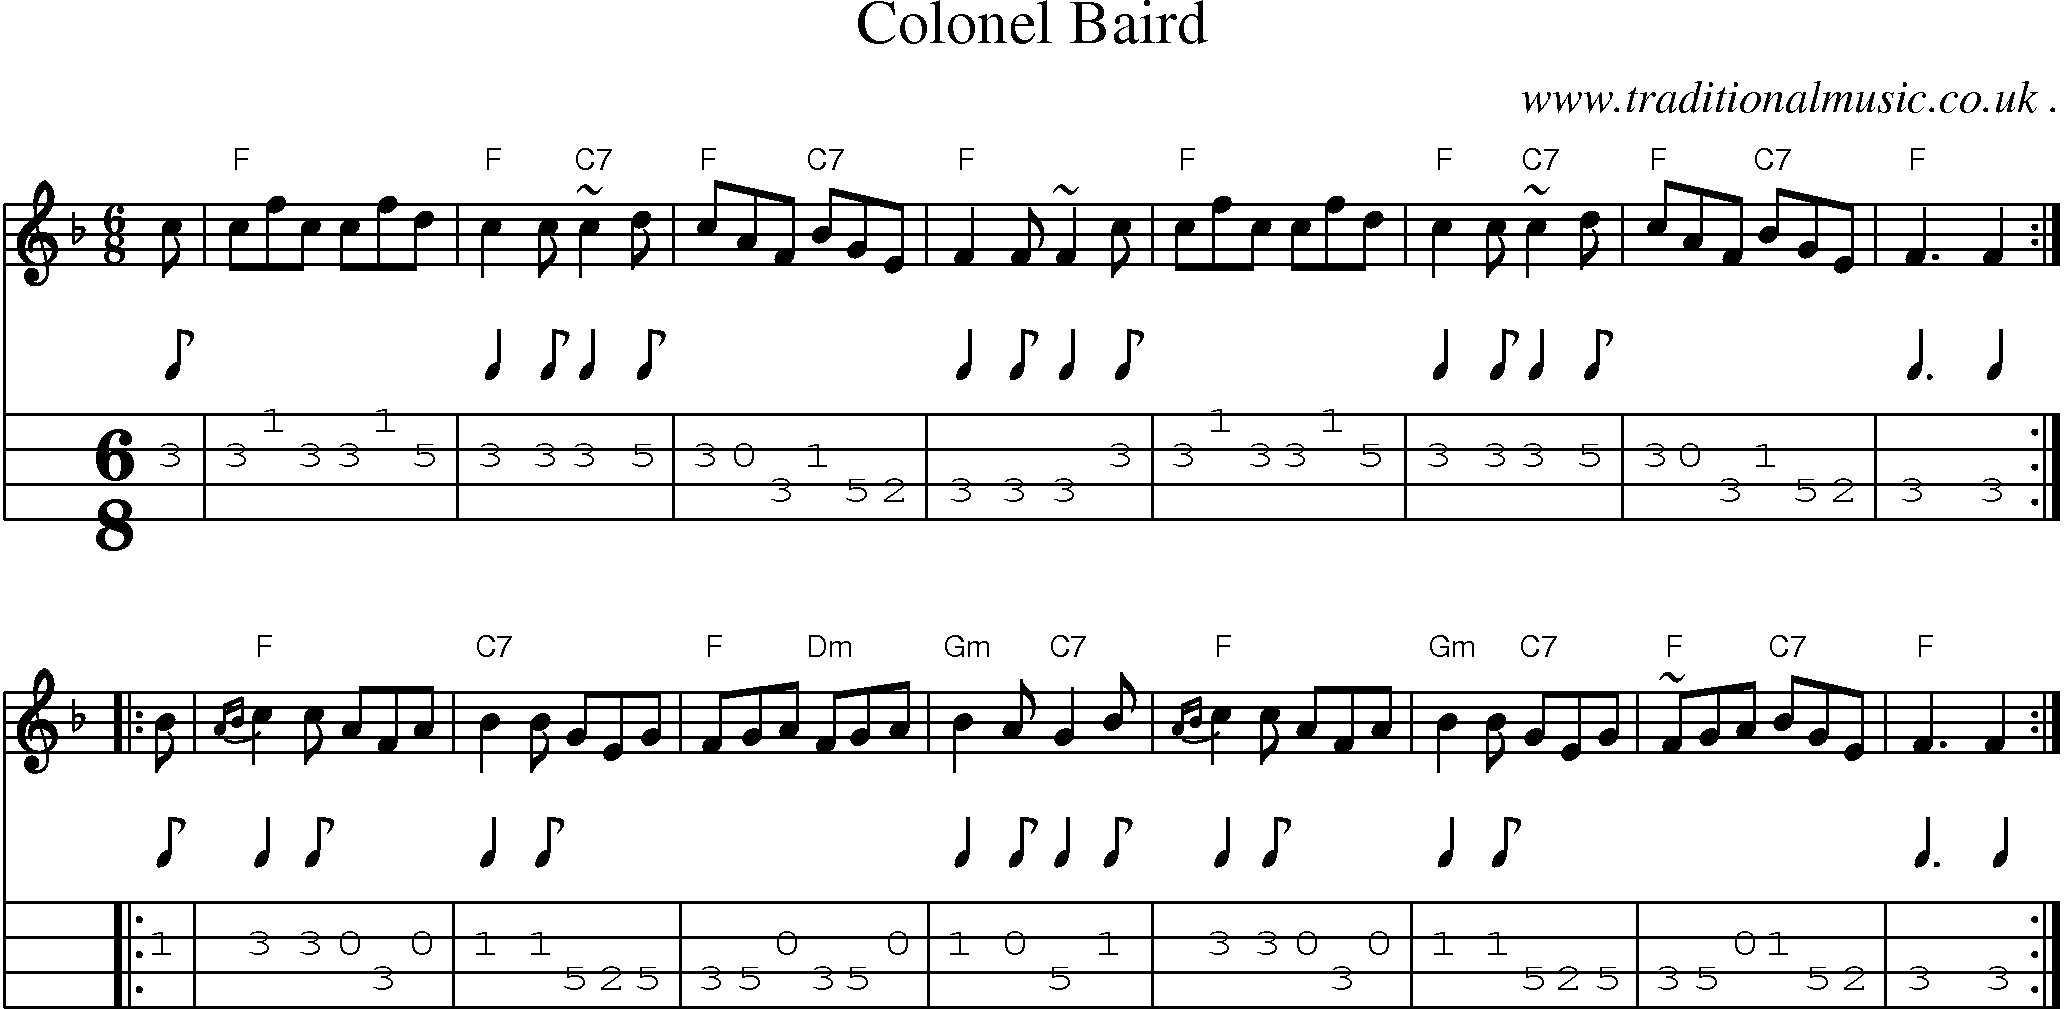 Sheet-music  score, Chords and Mandolin Tabs for Colonel Baird